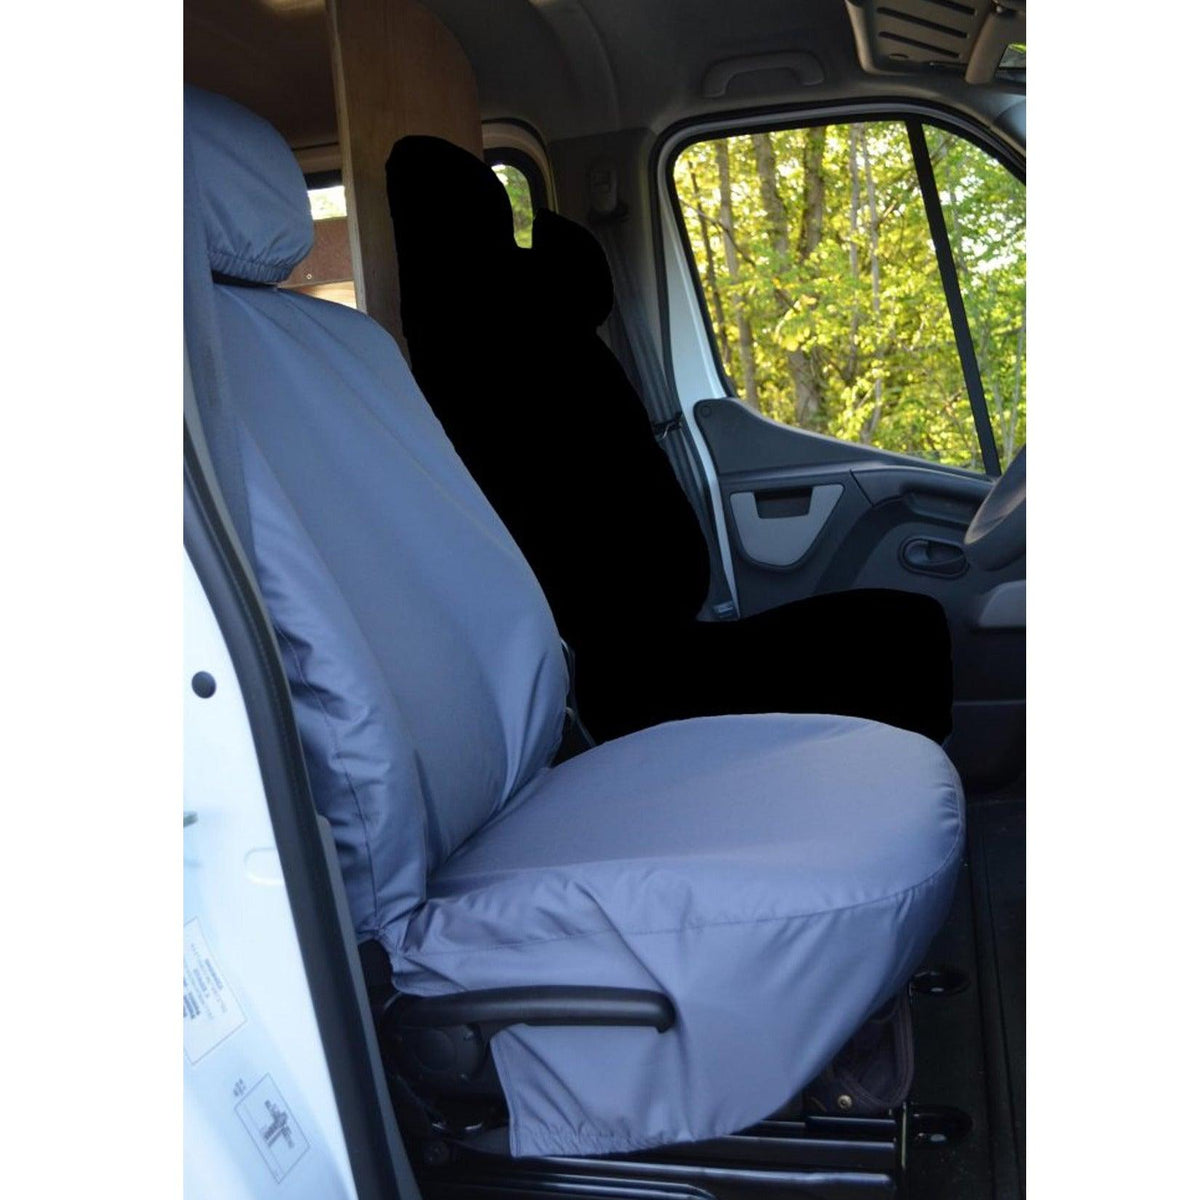 RENAULT MASTER VAN 2010 ON SINGLE DRIVER'S SEAT COVER - GREY - Storm Xccessories2